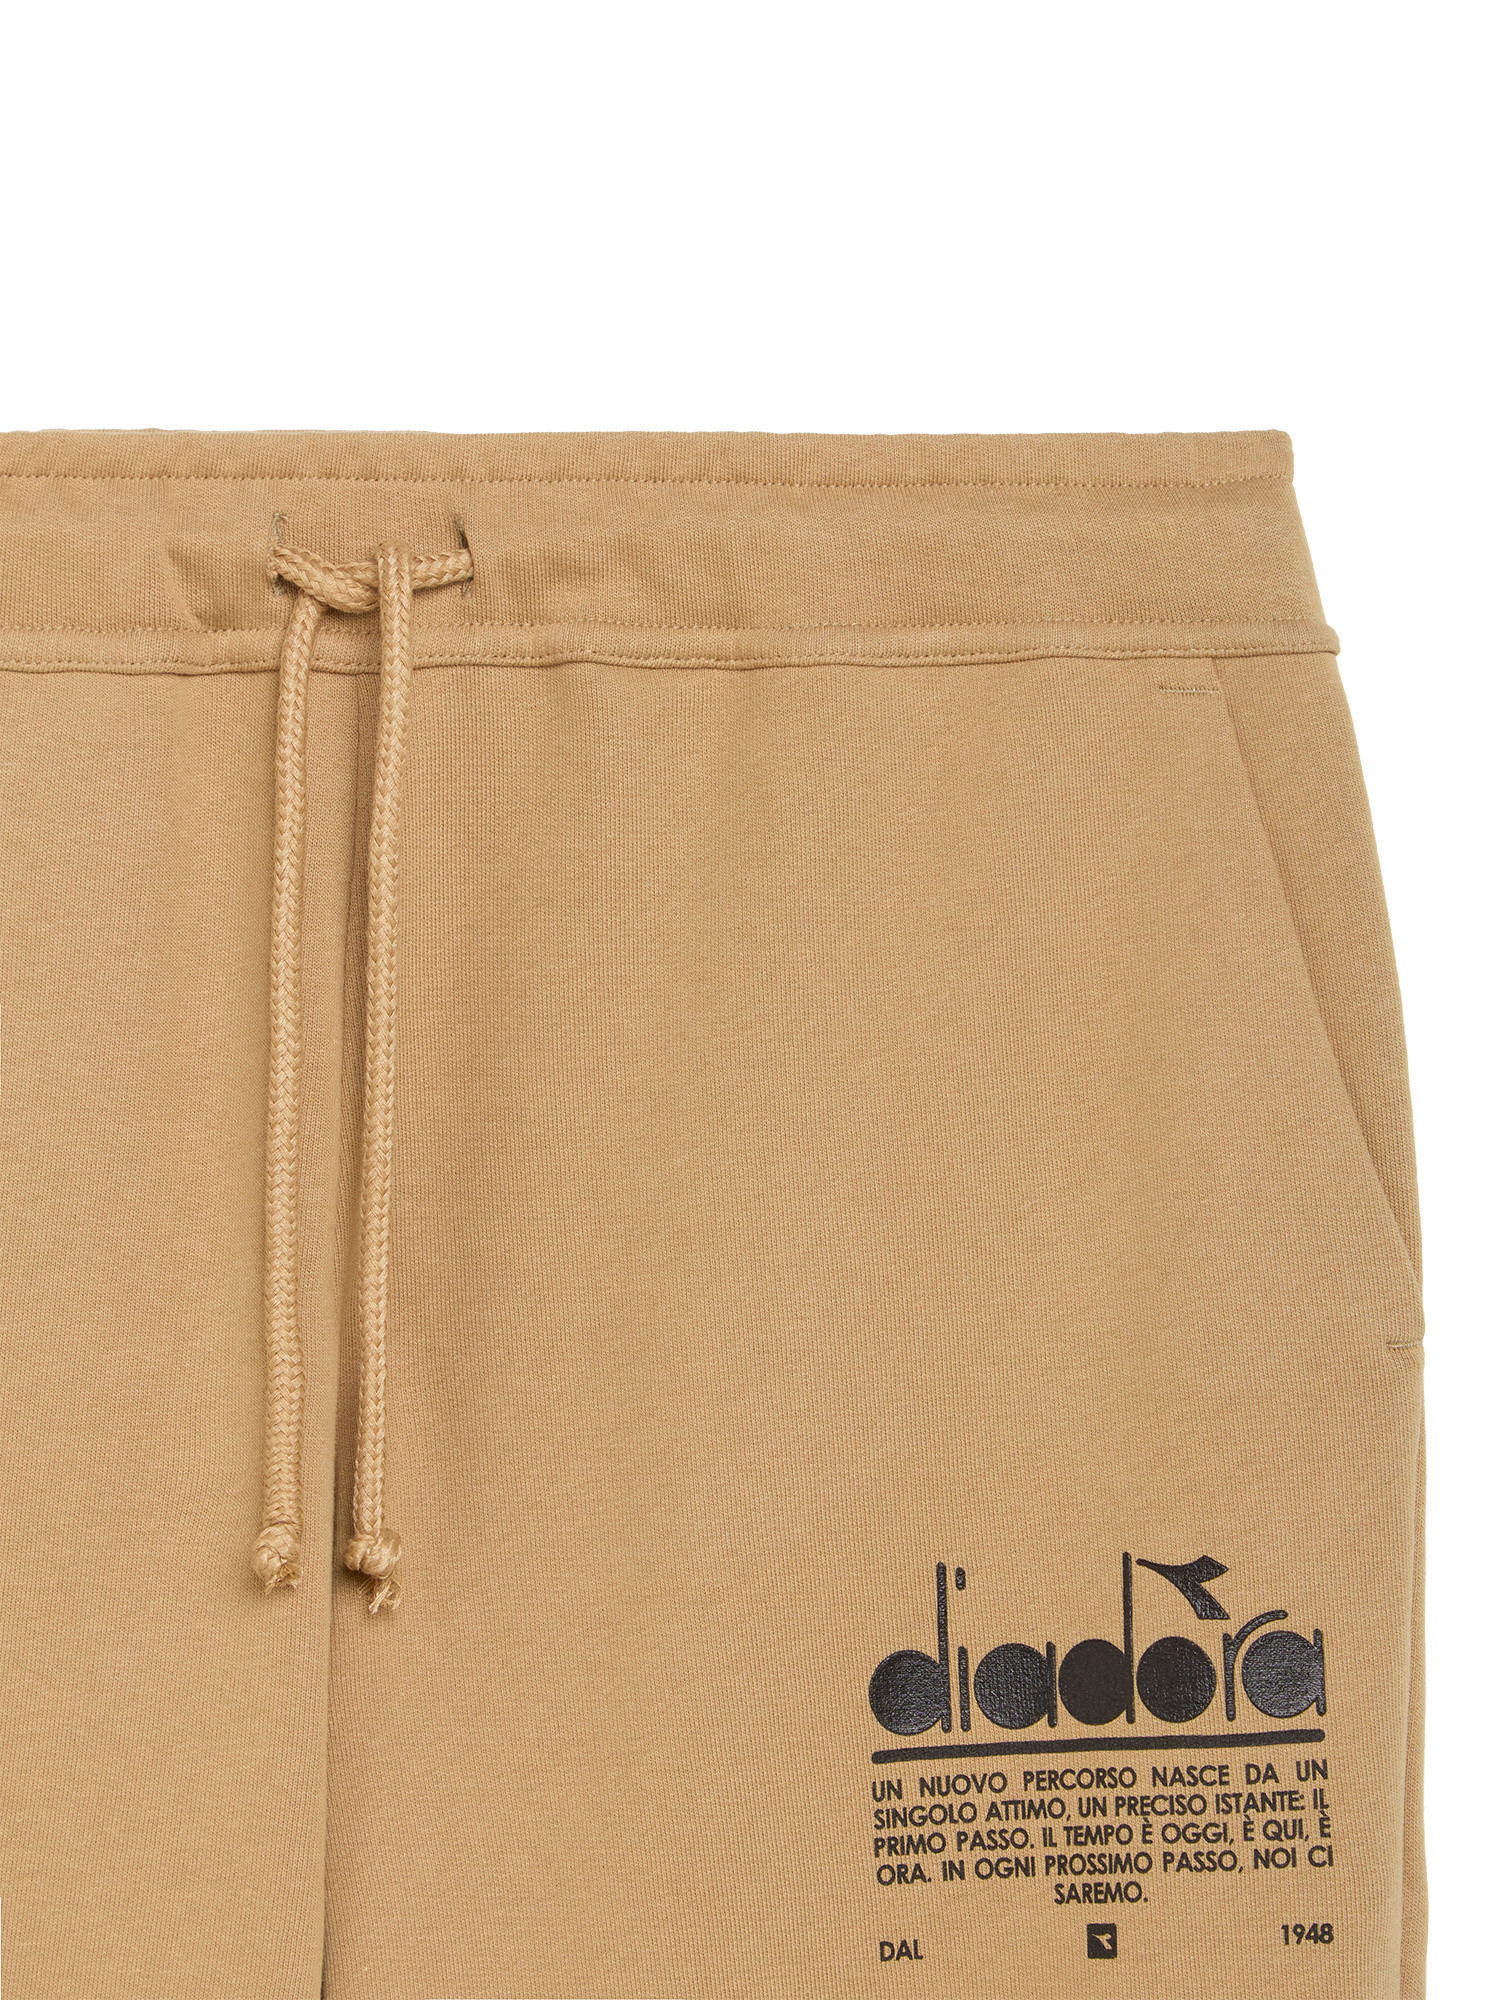 Diadora - Manifesto sports trousers with cotton print, Beige, large image number 1